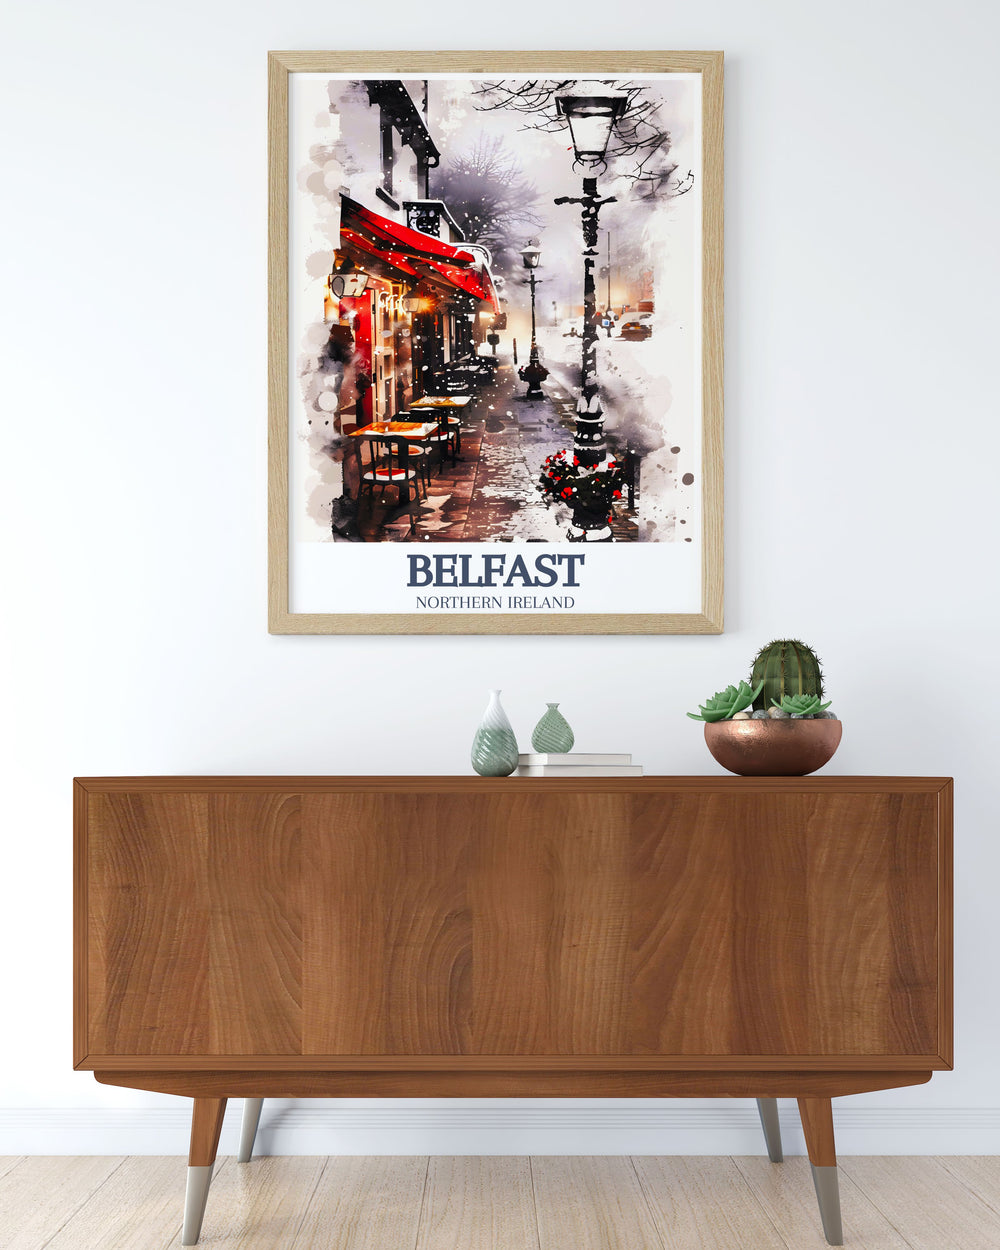 Stunning Cathedral Quarter Great Victoria Street artwork depicting the lively streets of Belfast. Ideal as a Belfast wall poster or an Ireland poster, bringing a piece of UK wall art into your home for a stylish and cultural touch.